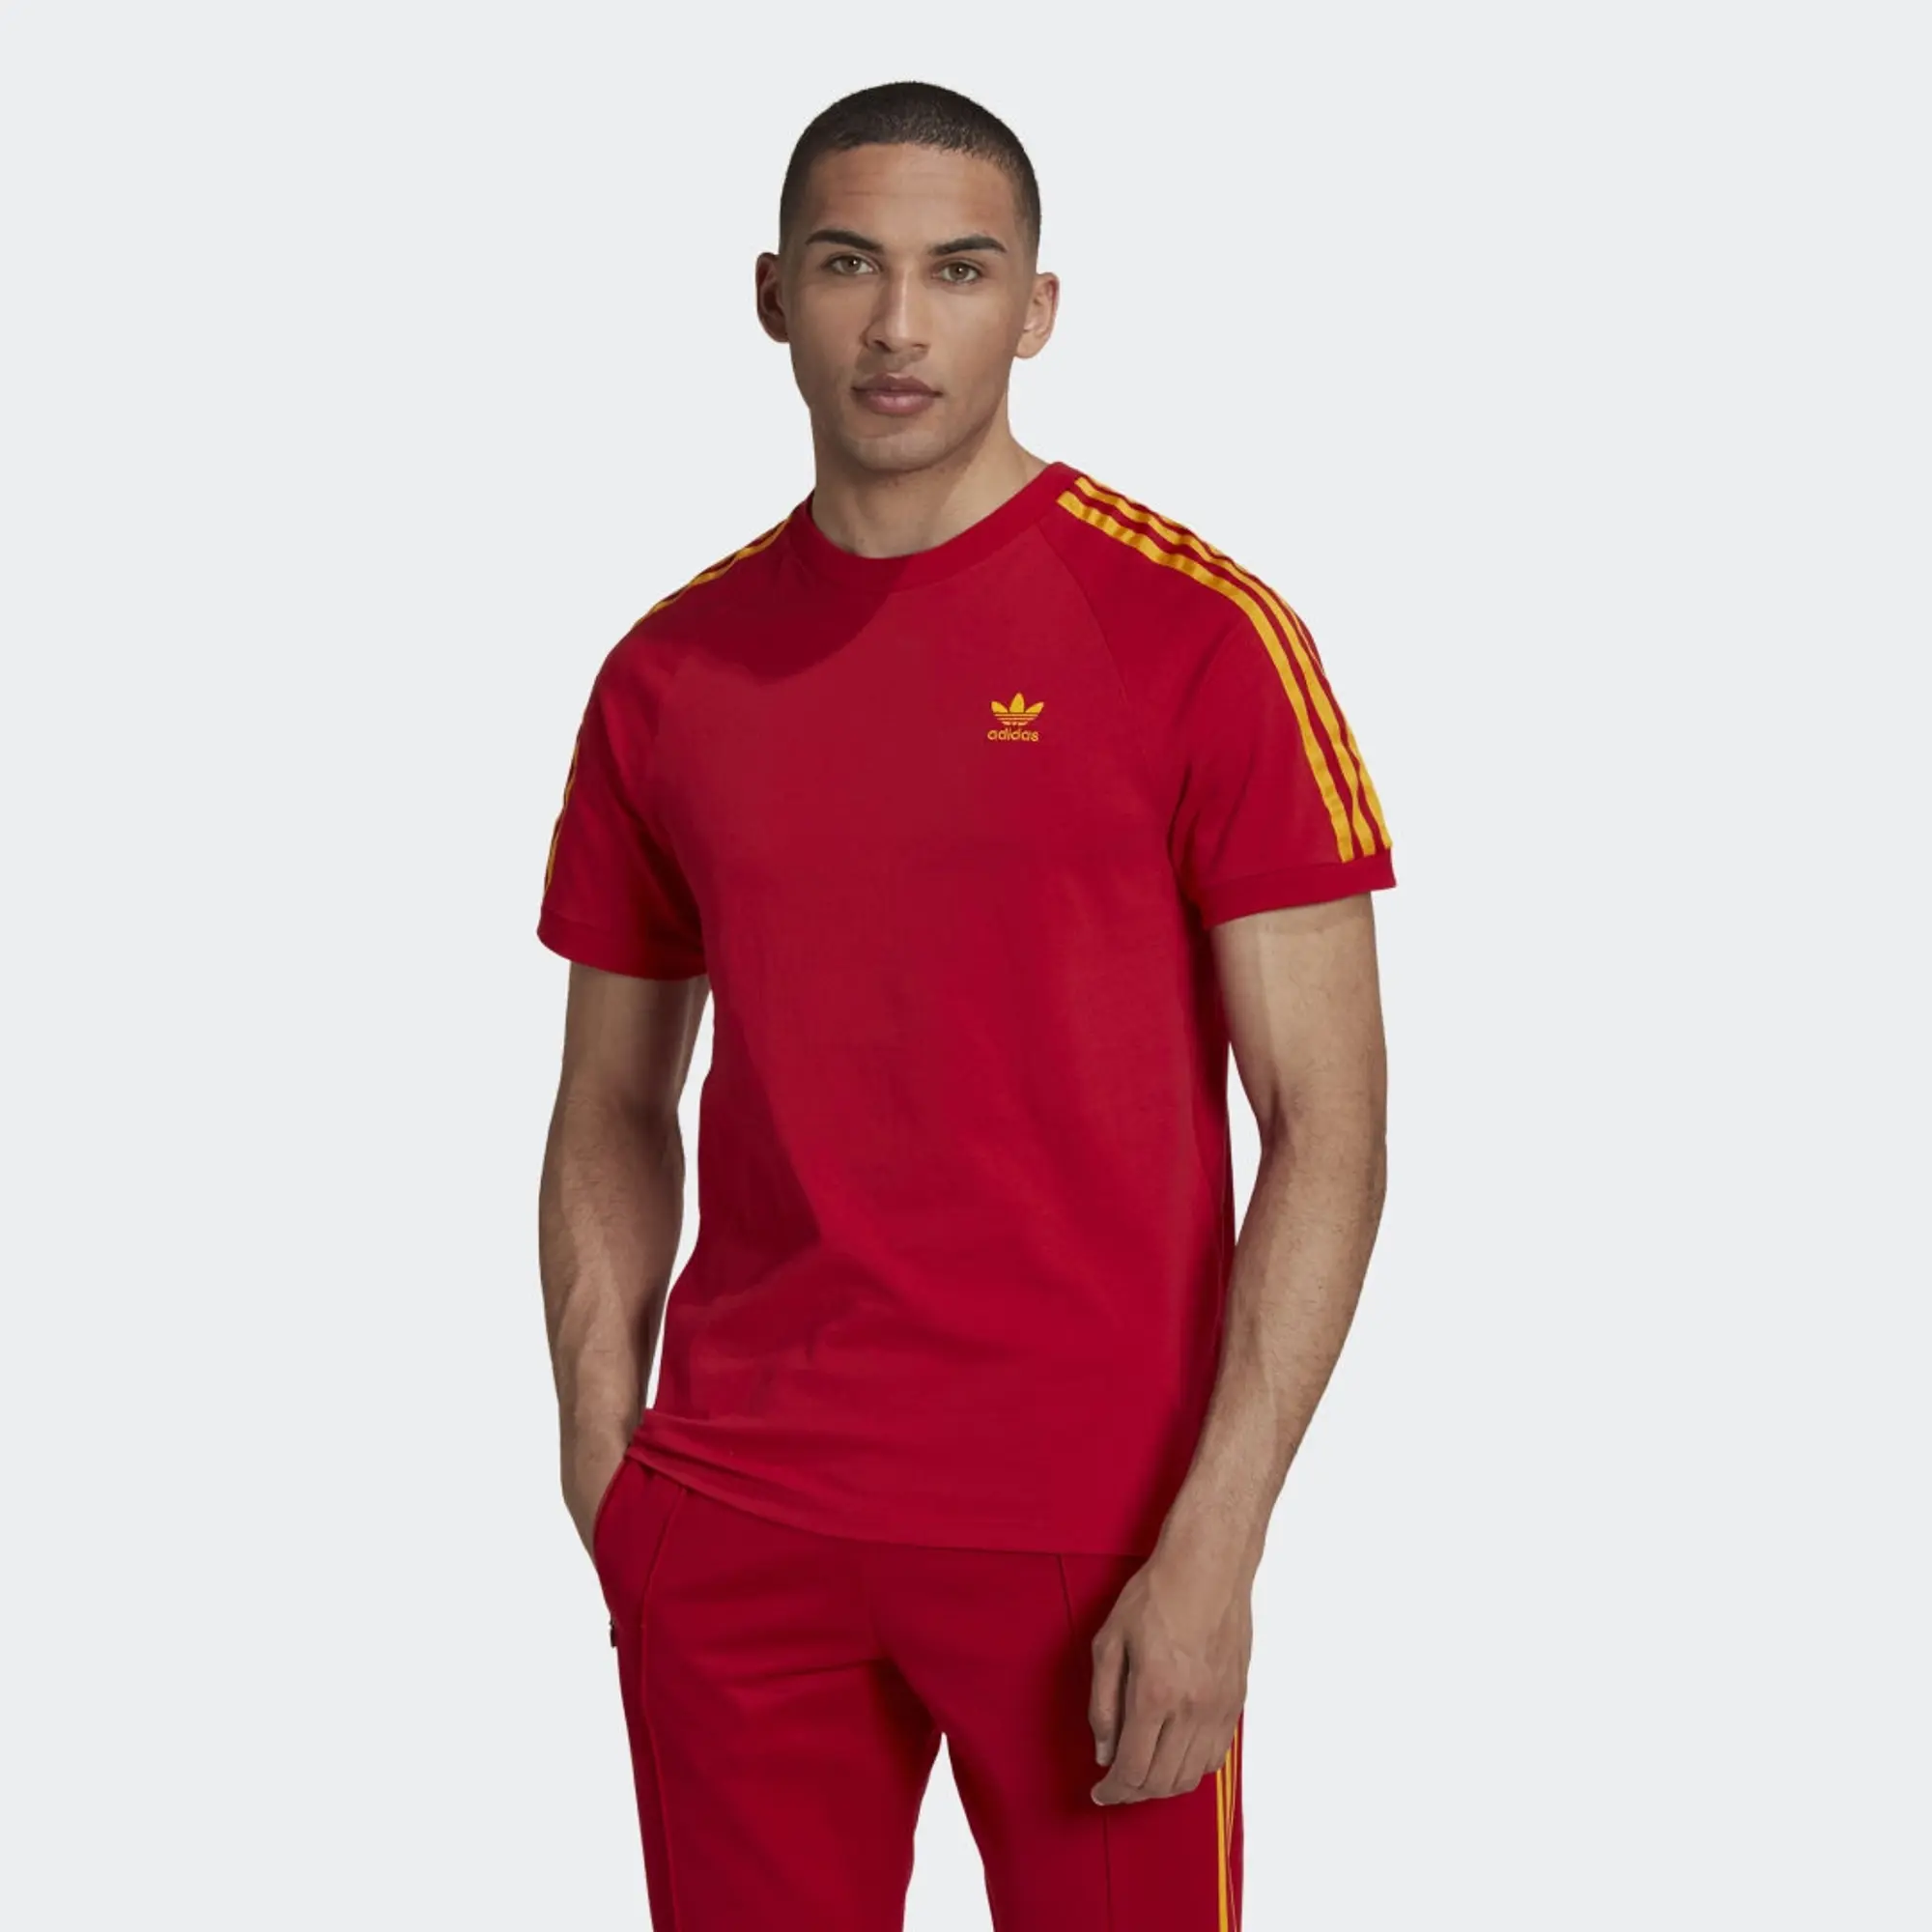 adidas Originals Spain Nations Tee - Red/Gold, Red/Gold